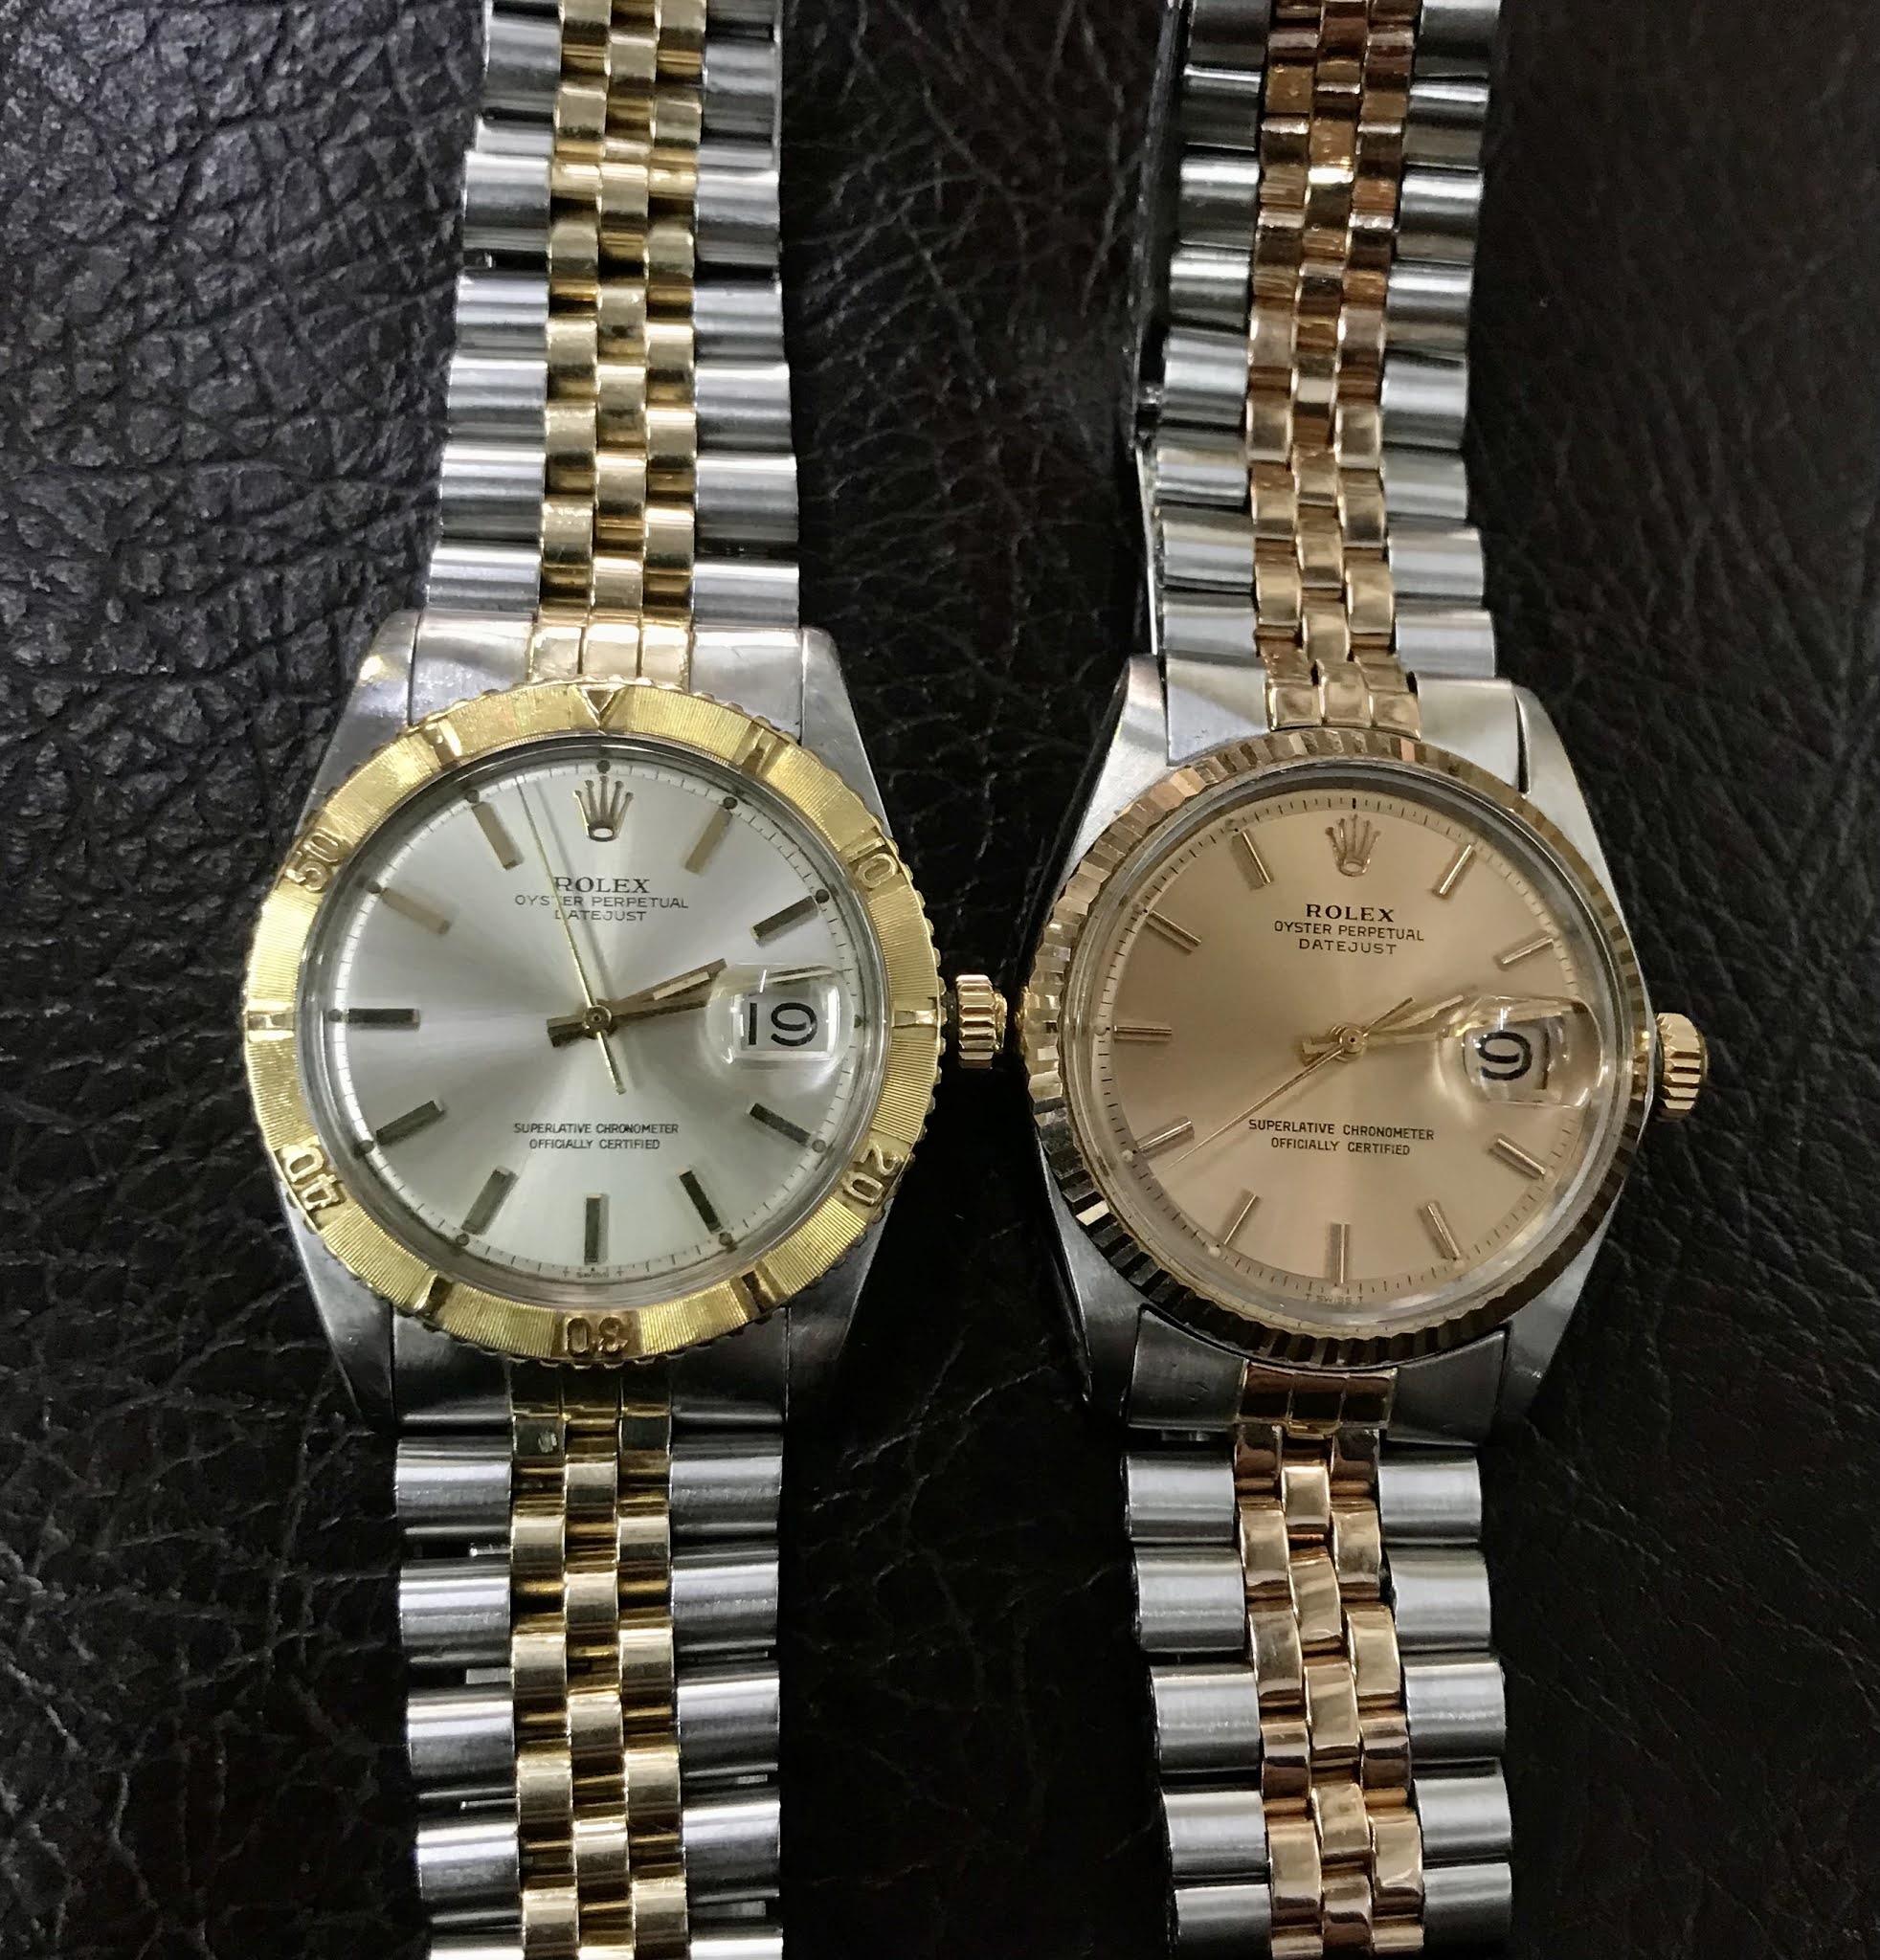 Vintage watch experience 古董手錶: Rolex ref 1625 yellow gold steel vs ...